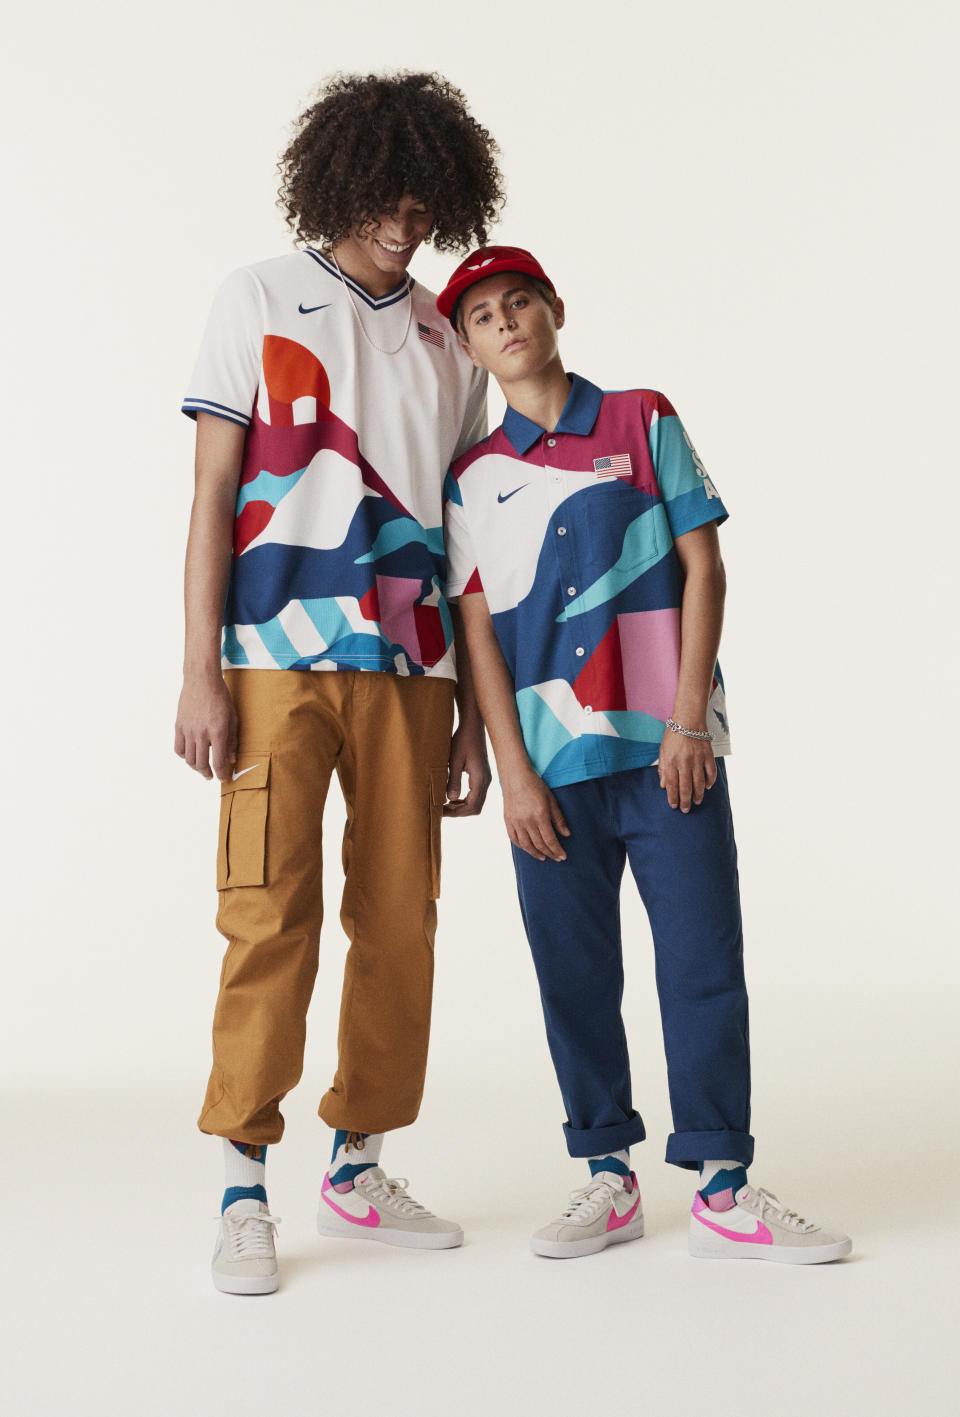 Nike released its Olympic uniforms, including these two for the U.S. skateboarding team, and suddenly we want to take up the sport. (Photo: Nike )